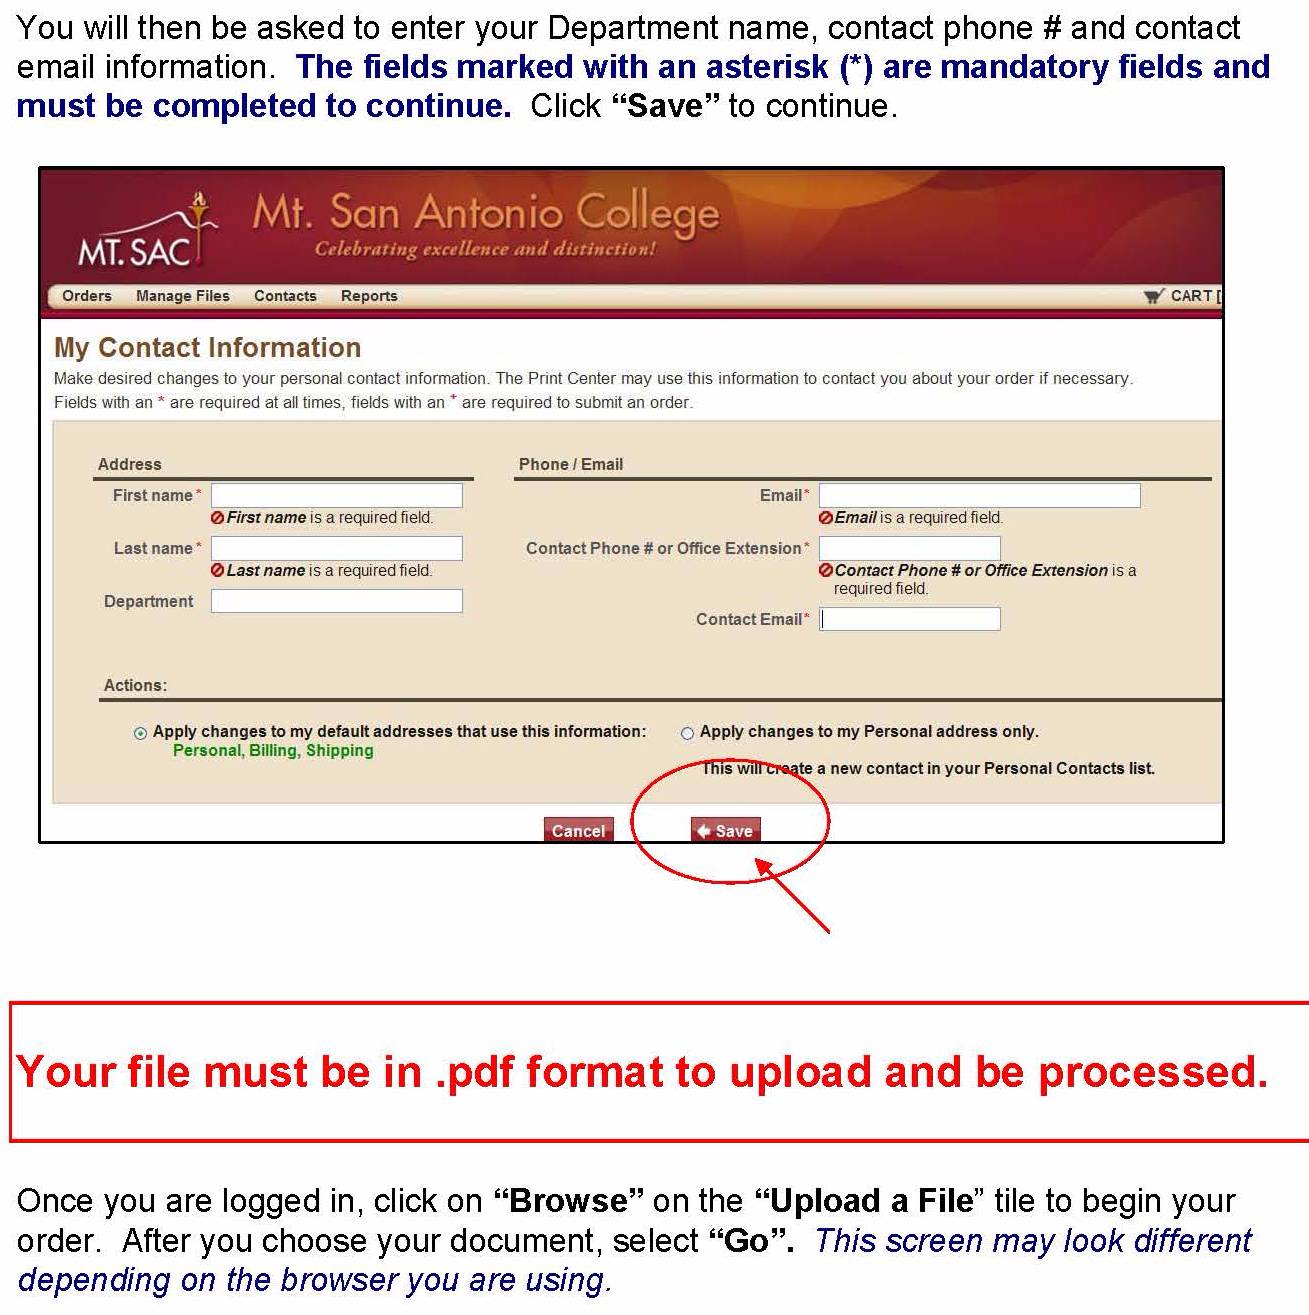 Enter your name and other information. You must upload a PDF to continue.